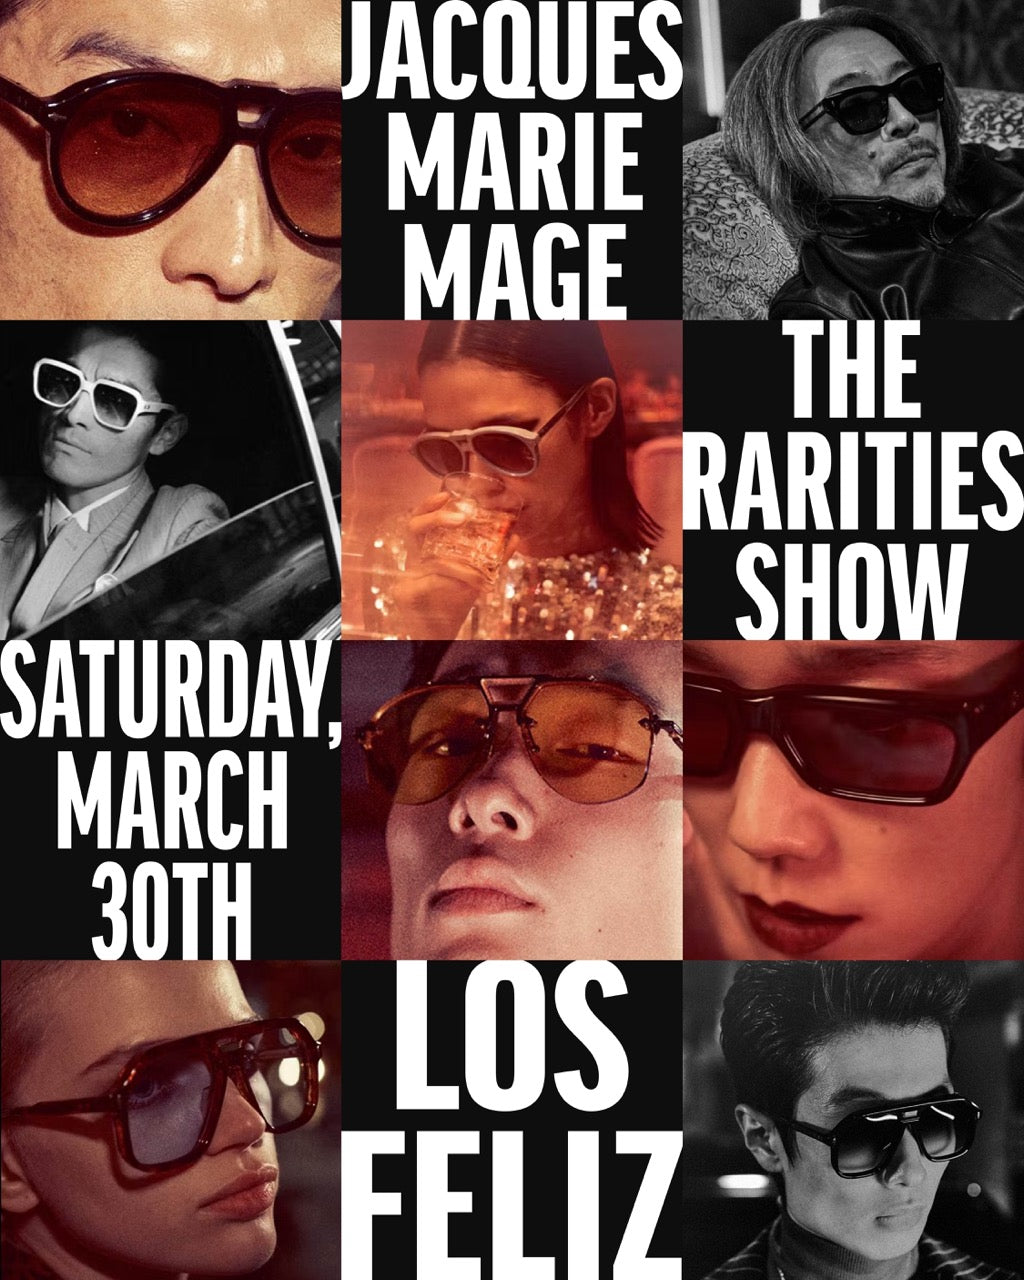 Jacques Marie Mage: THE RARITIES SHOW